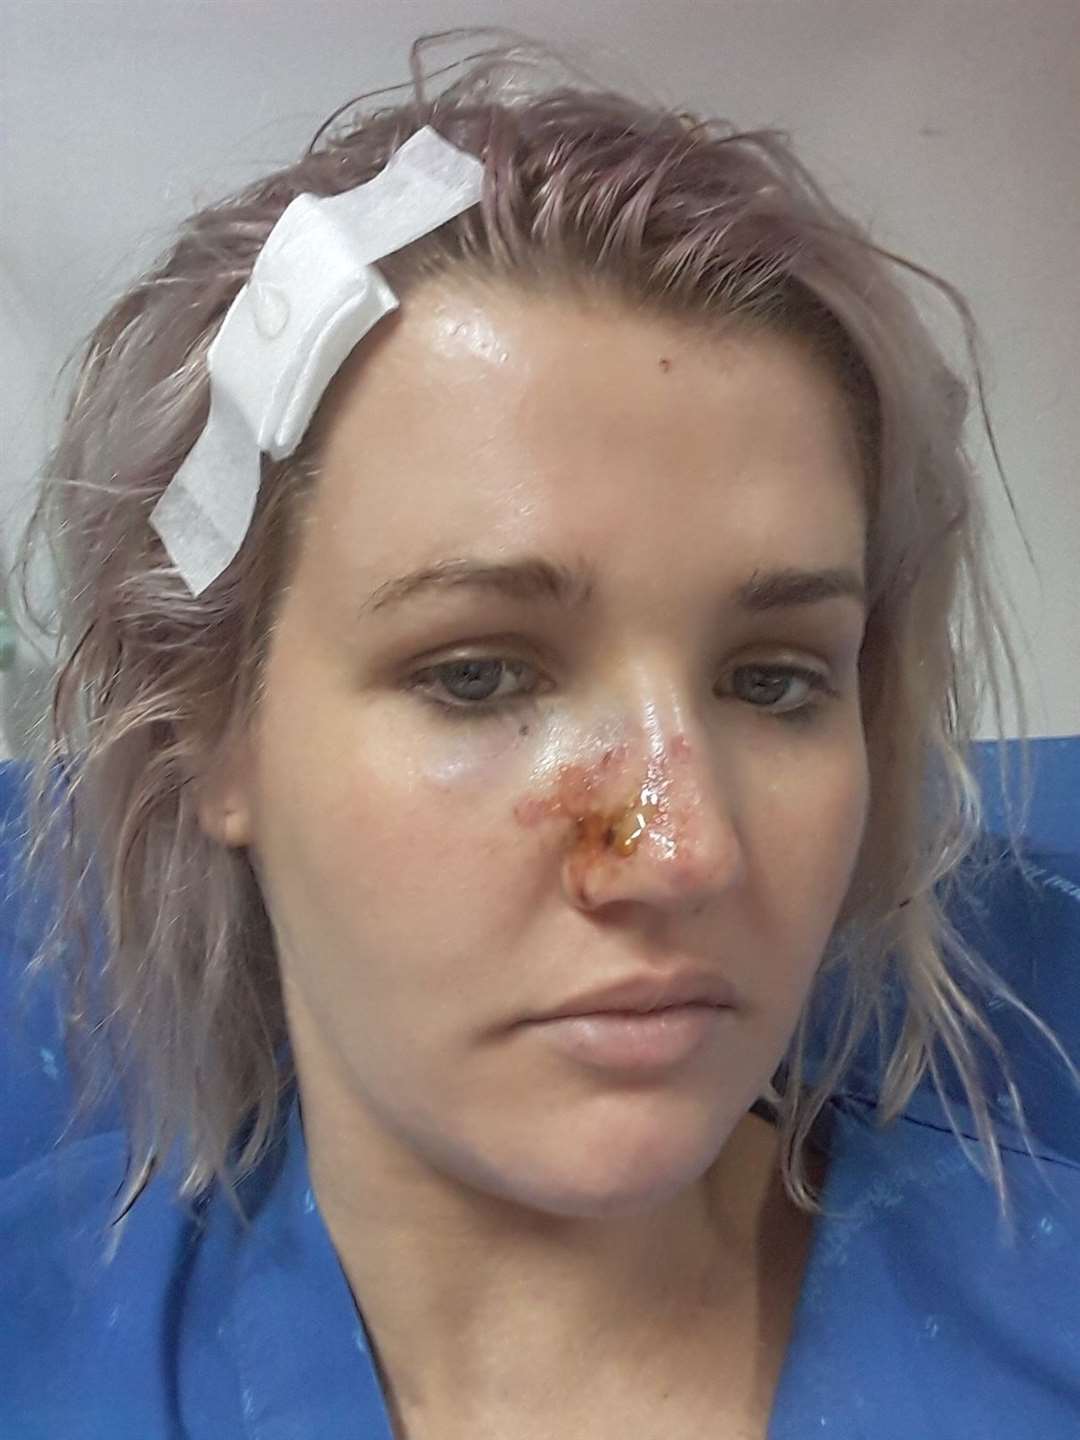 Abi Harrison had to pay a £12,000 medical bill as her insurance did not cover emergency surgery